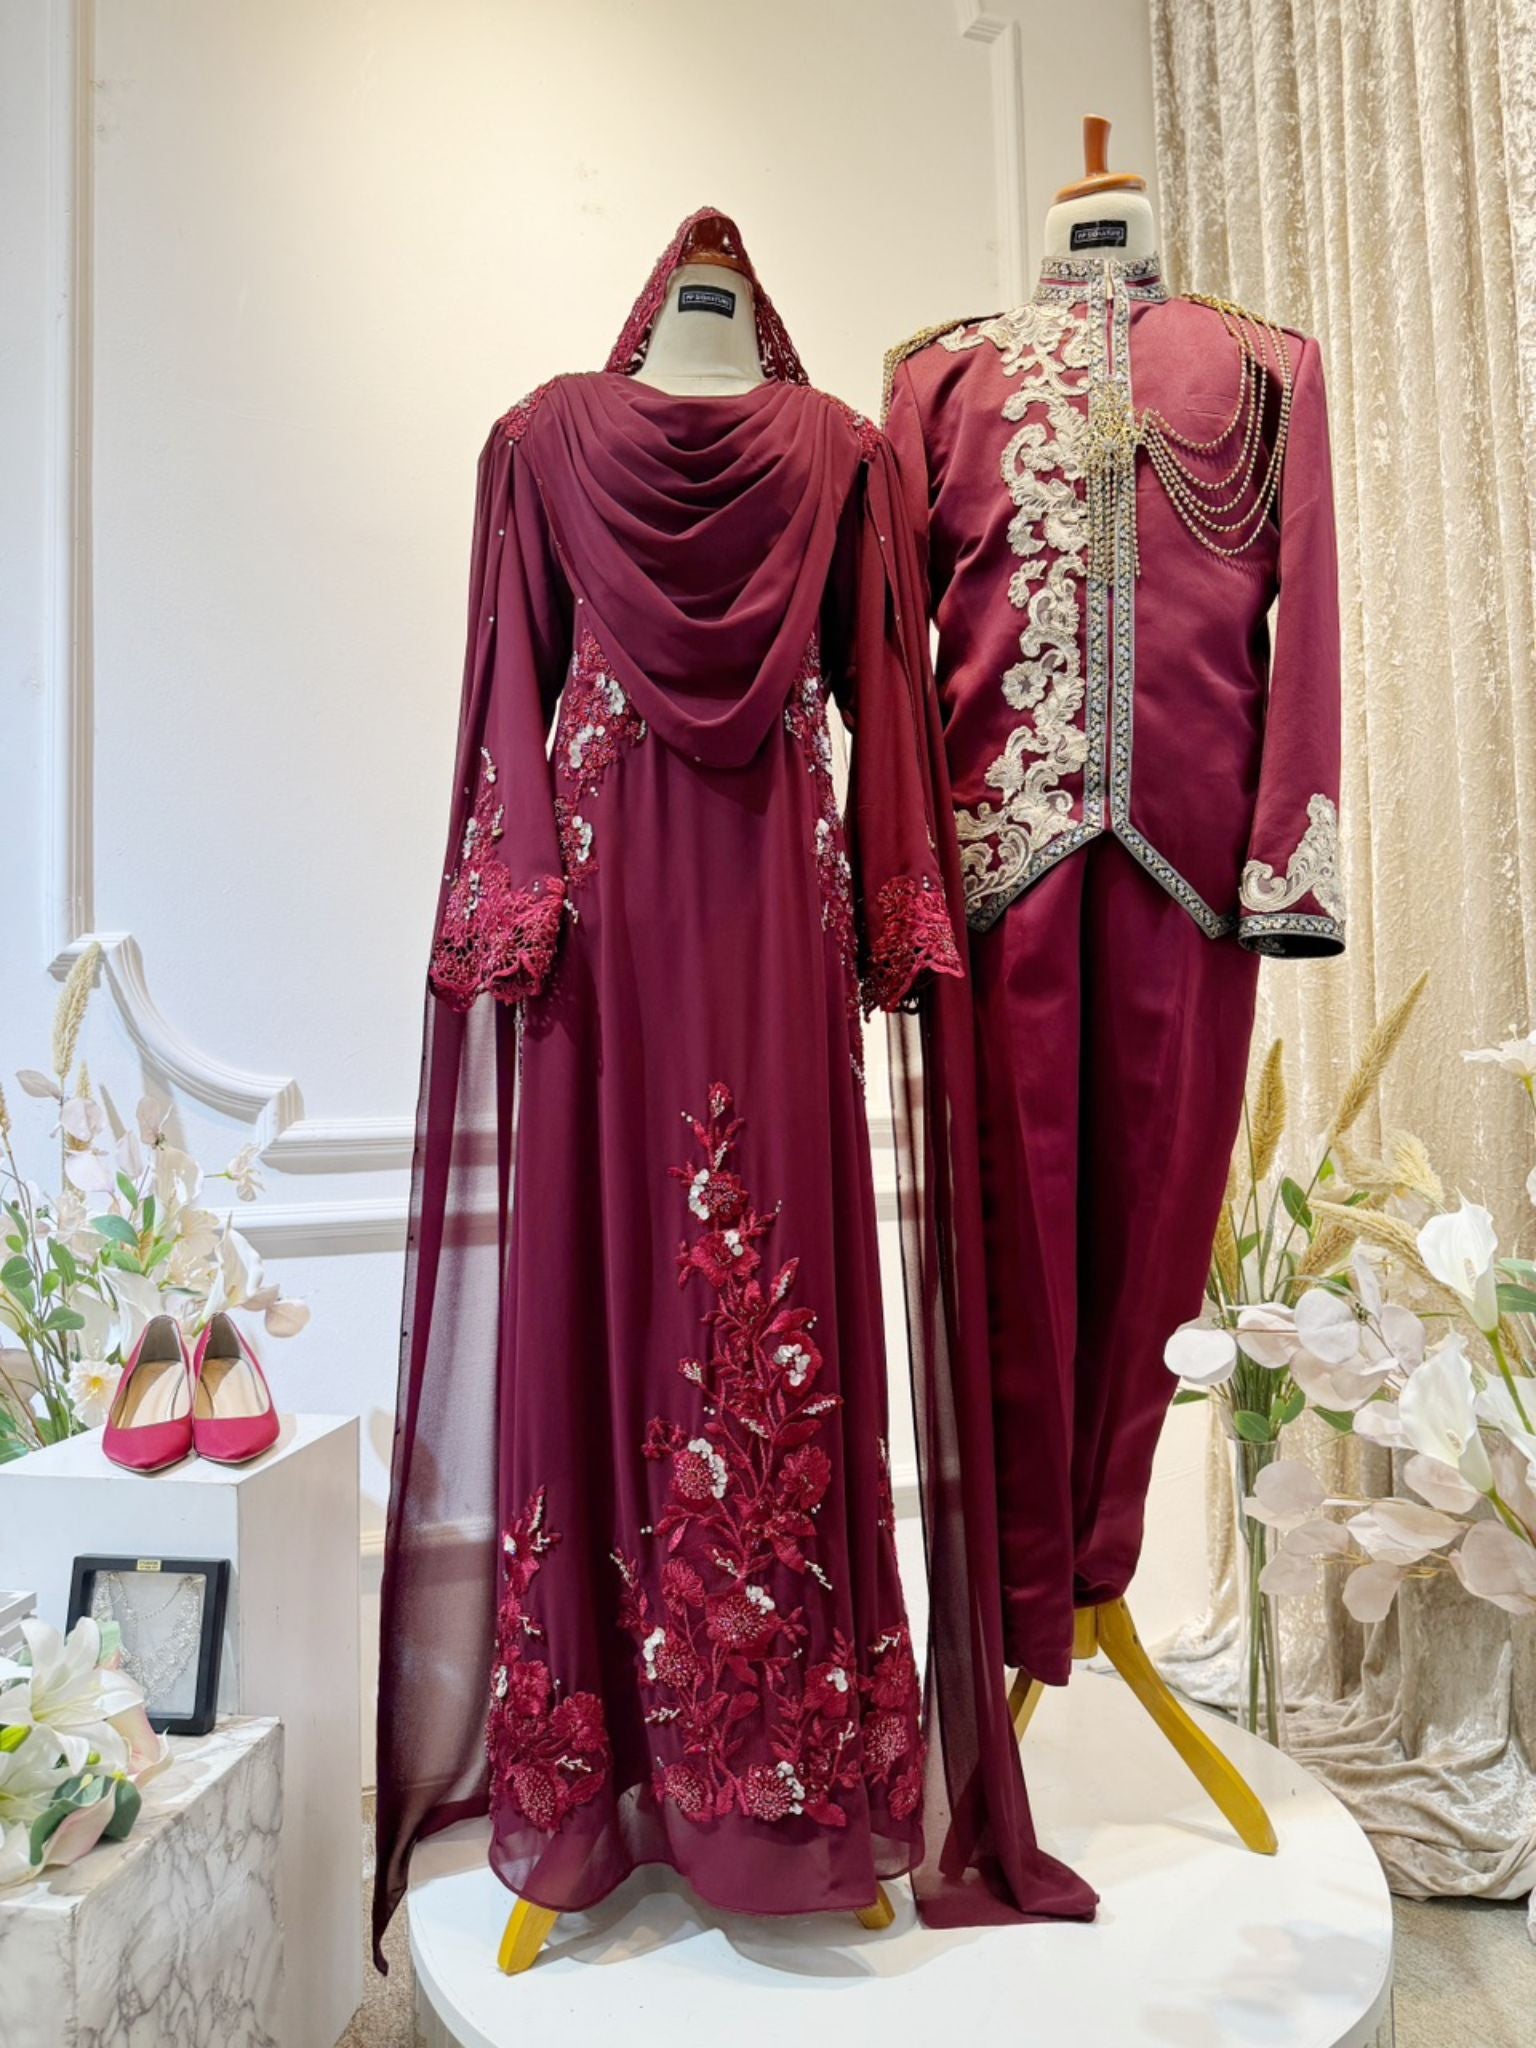 WARDINA offers a captivating Baju Pengantin ensemble in Maroon Burgundy, tailored for your wedding reception (Baju Sanding). The bride's attire features a graceful loose dress with an elegant shoulder cape, while grooms can choose between the classic Prince Suit or the traditional Kot Raihan 3-piece set. Crafted from luxurious chiffon material, this ensemble epitomizes sophistication and style, ensuring a memorable presence for both bride and groom on their special day.